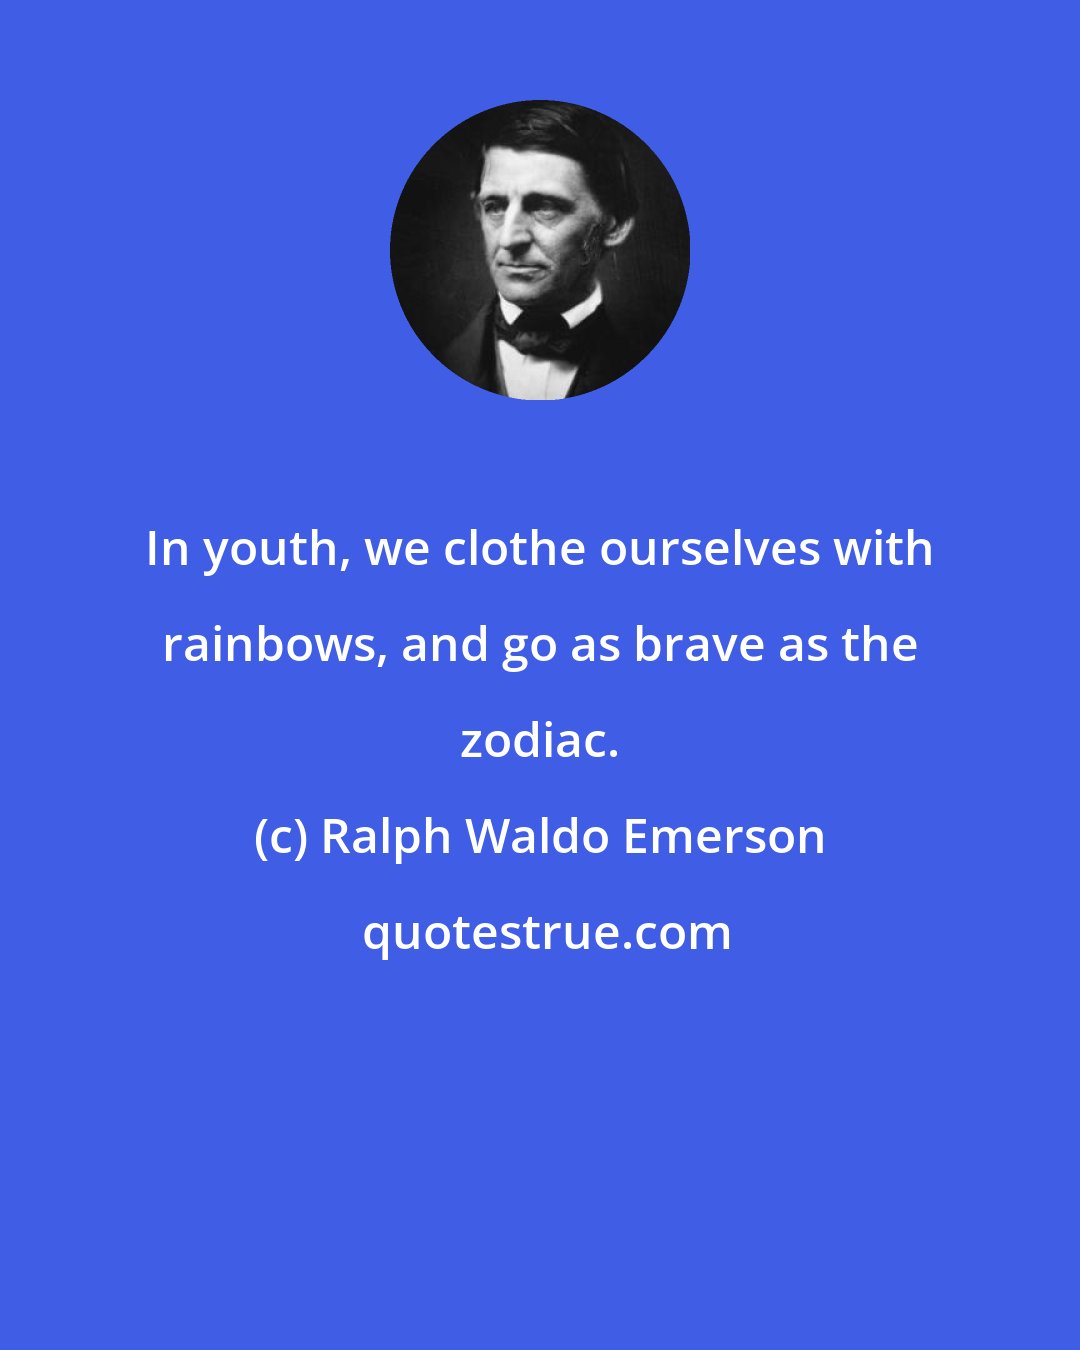 Ralph Waldo Emerson: In youth, we clothe ourselves with rainbows, and go as brave as the zodiac.